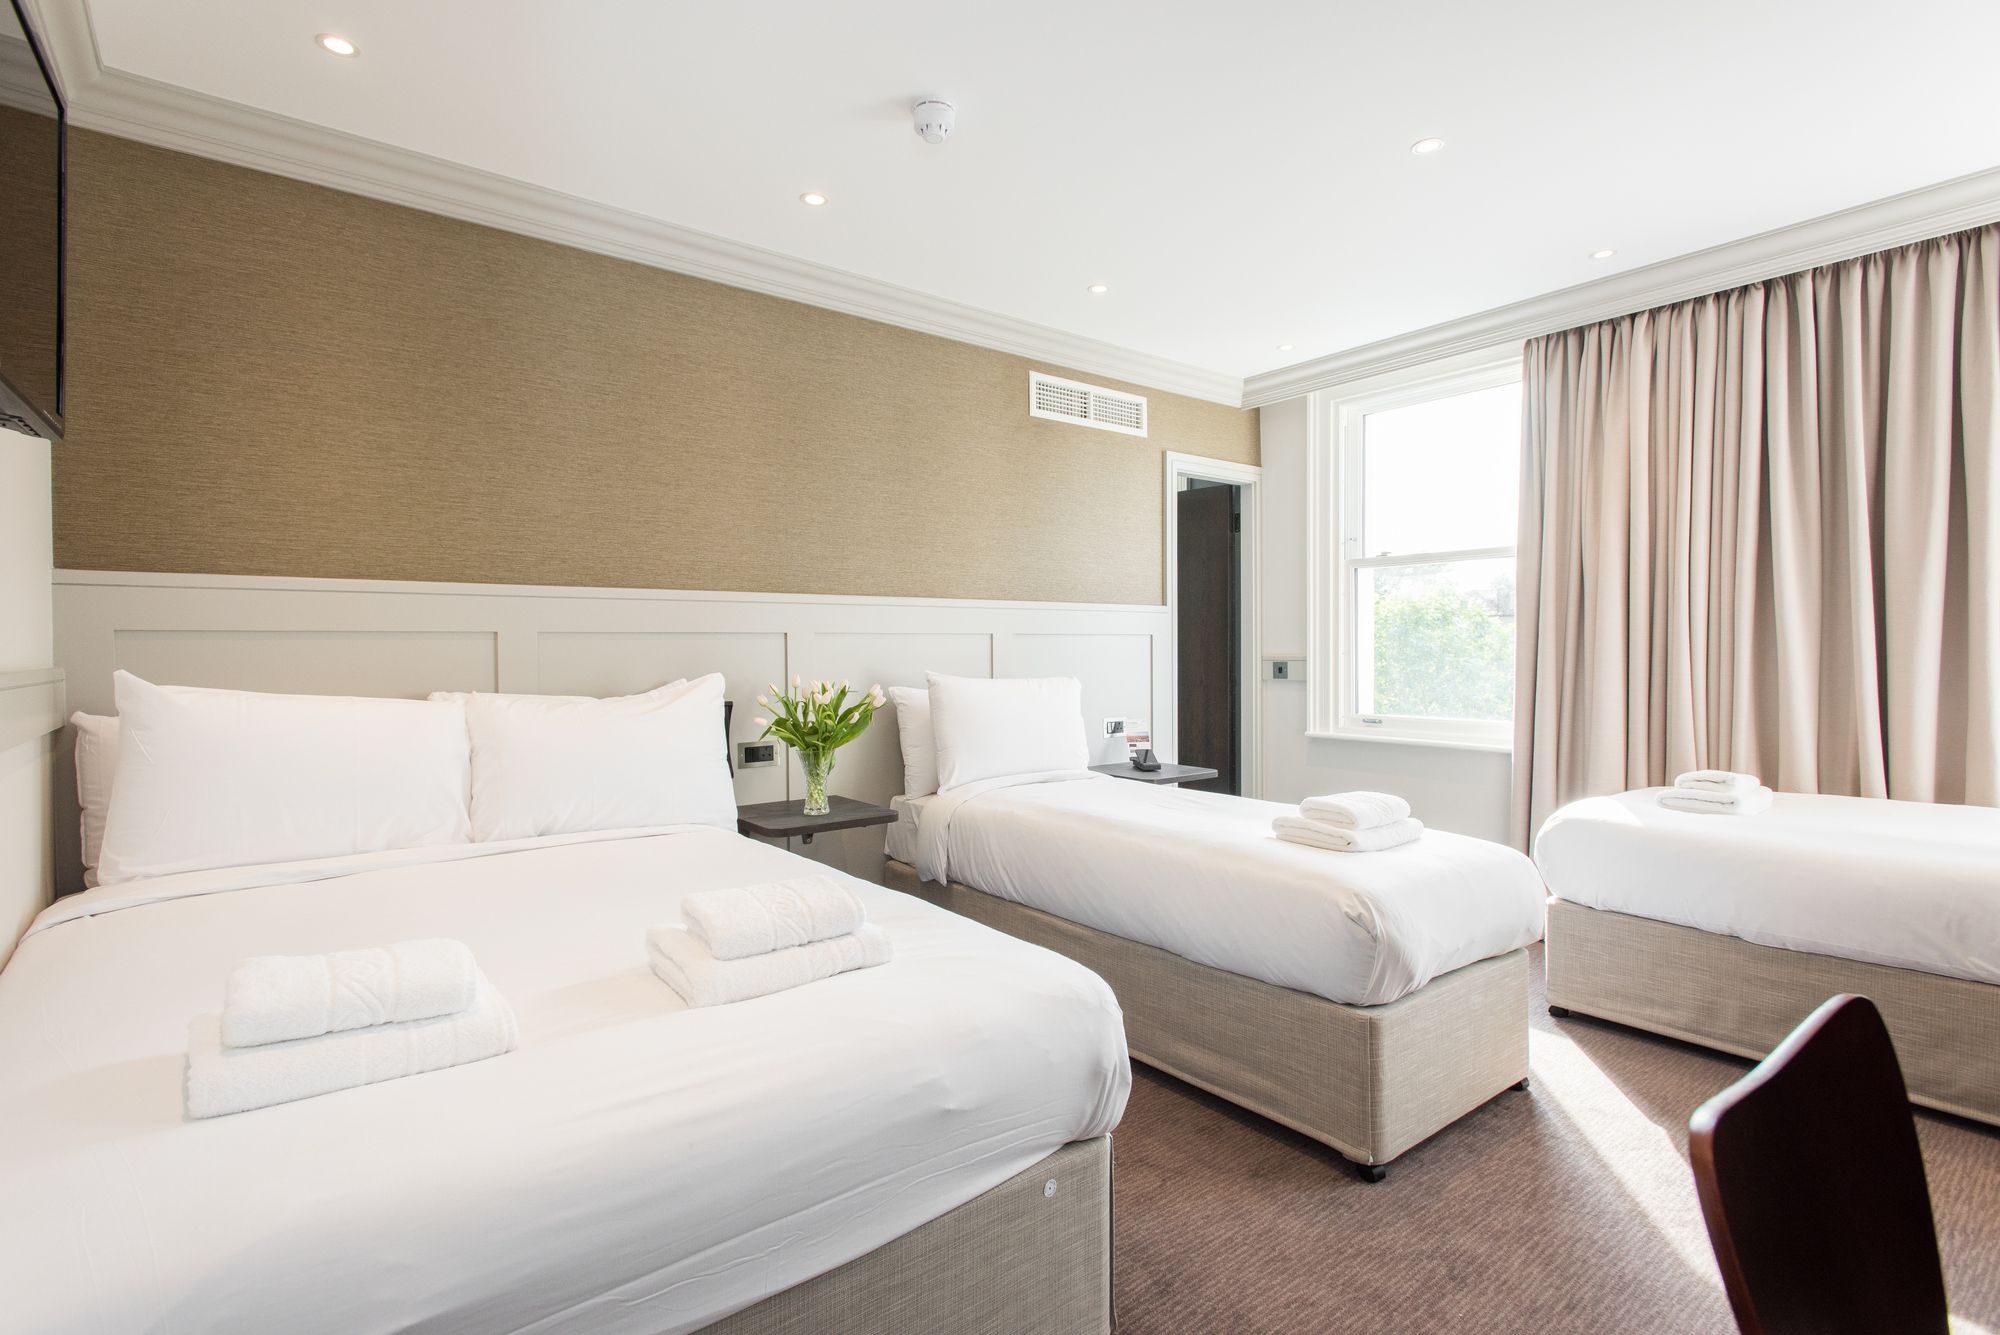 Easter in London: Where to book? Mowbray Court Hotel offers great deals!